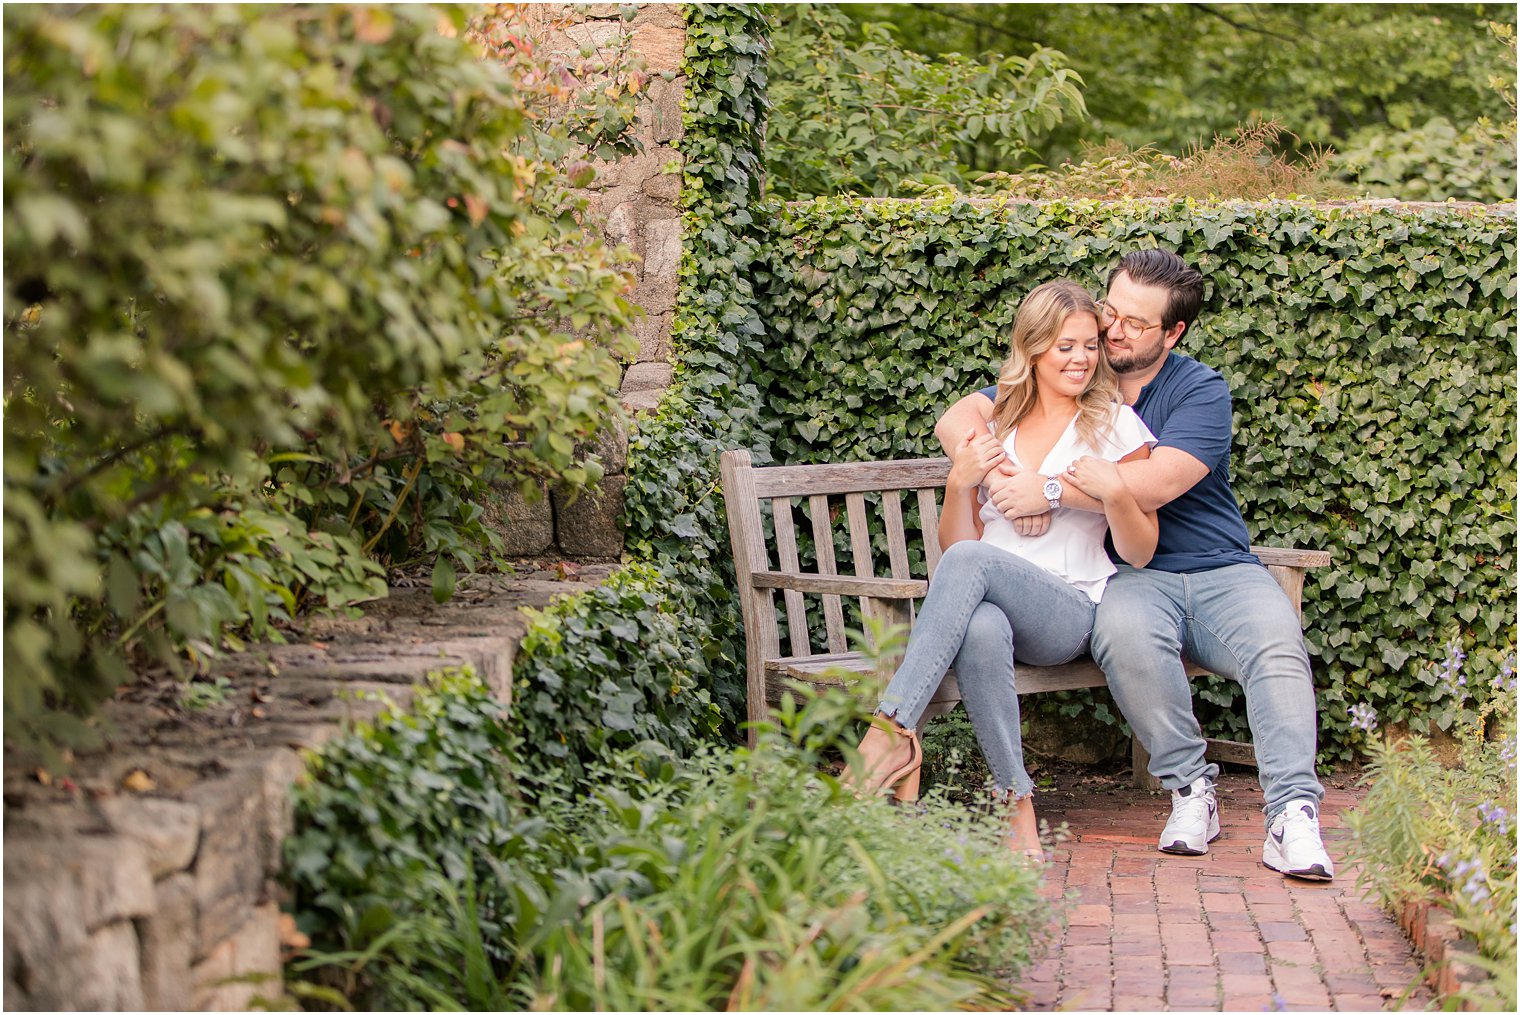 New Jersey couple sits on bench in gardens